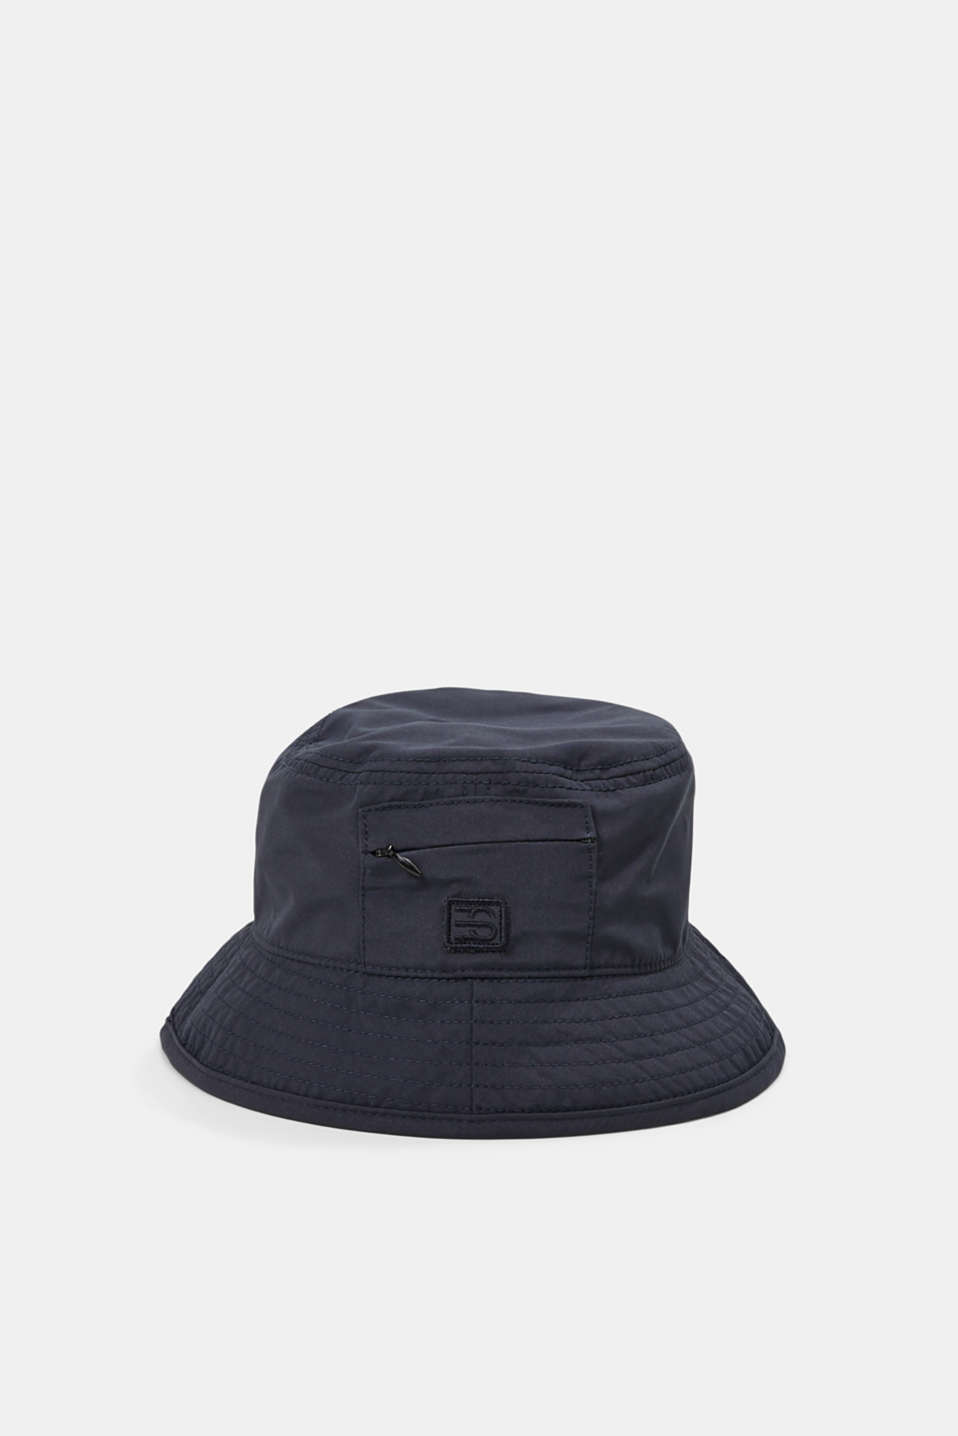 Esprit - Bucket hat with a zip pocket at our Online Shop